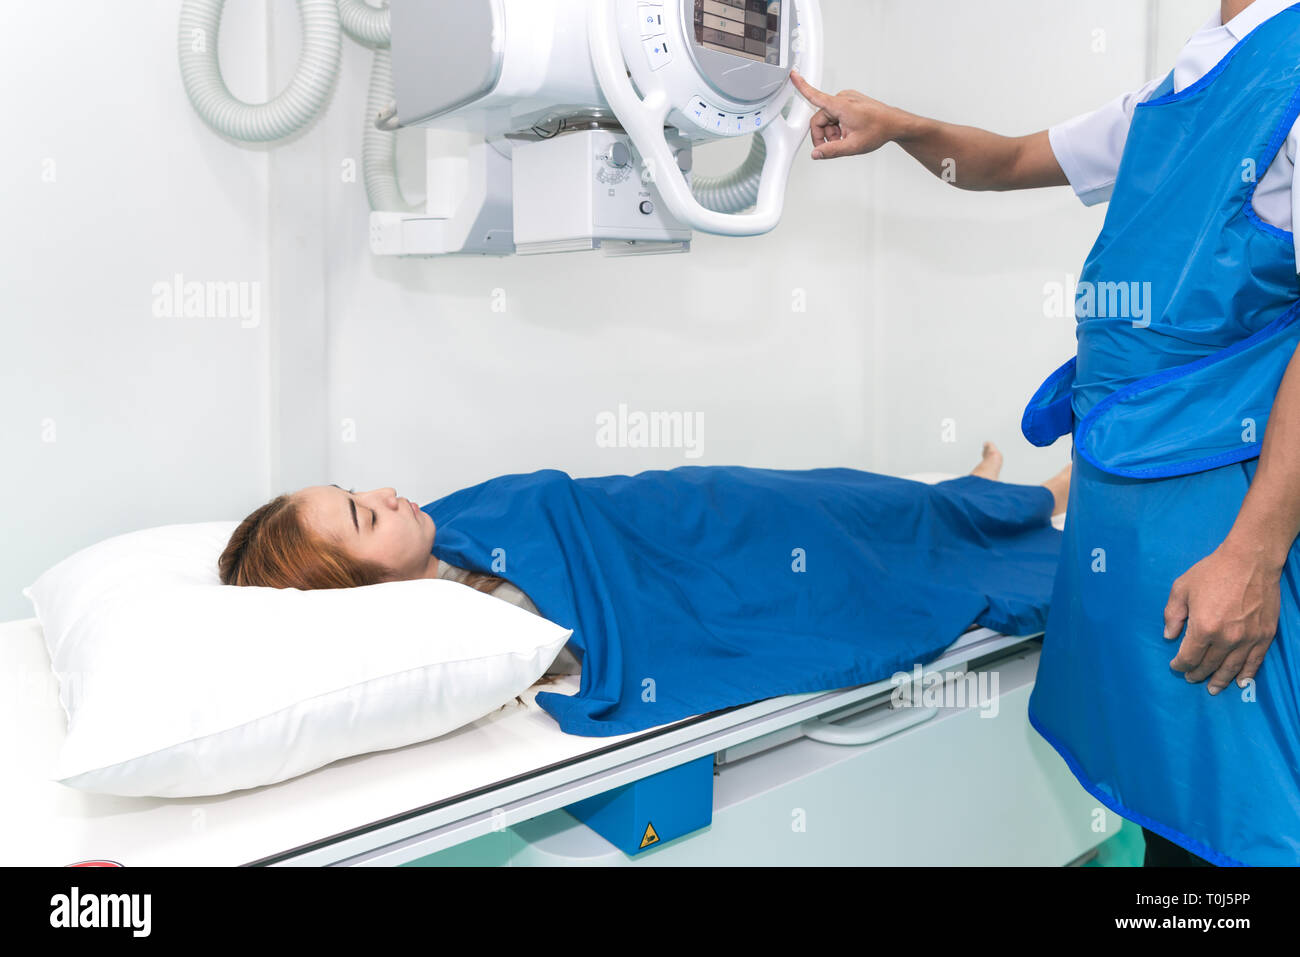 Asian young woman patient lying under X-ray device with radiologist preparing machine in X-ray room at hospital. Stock Photo